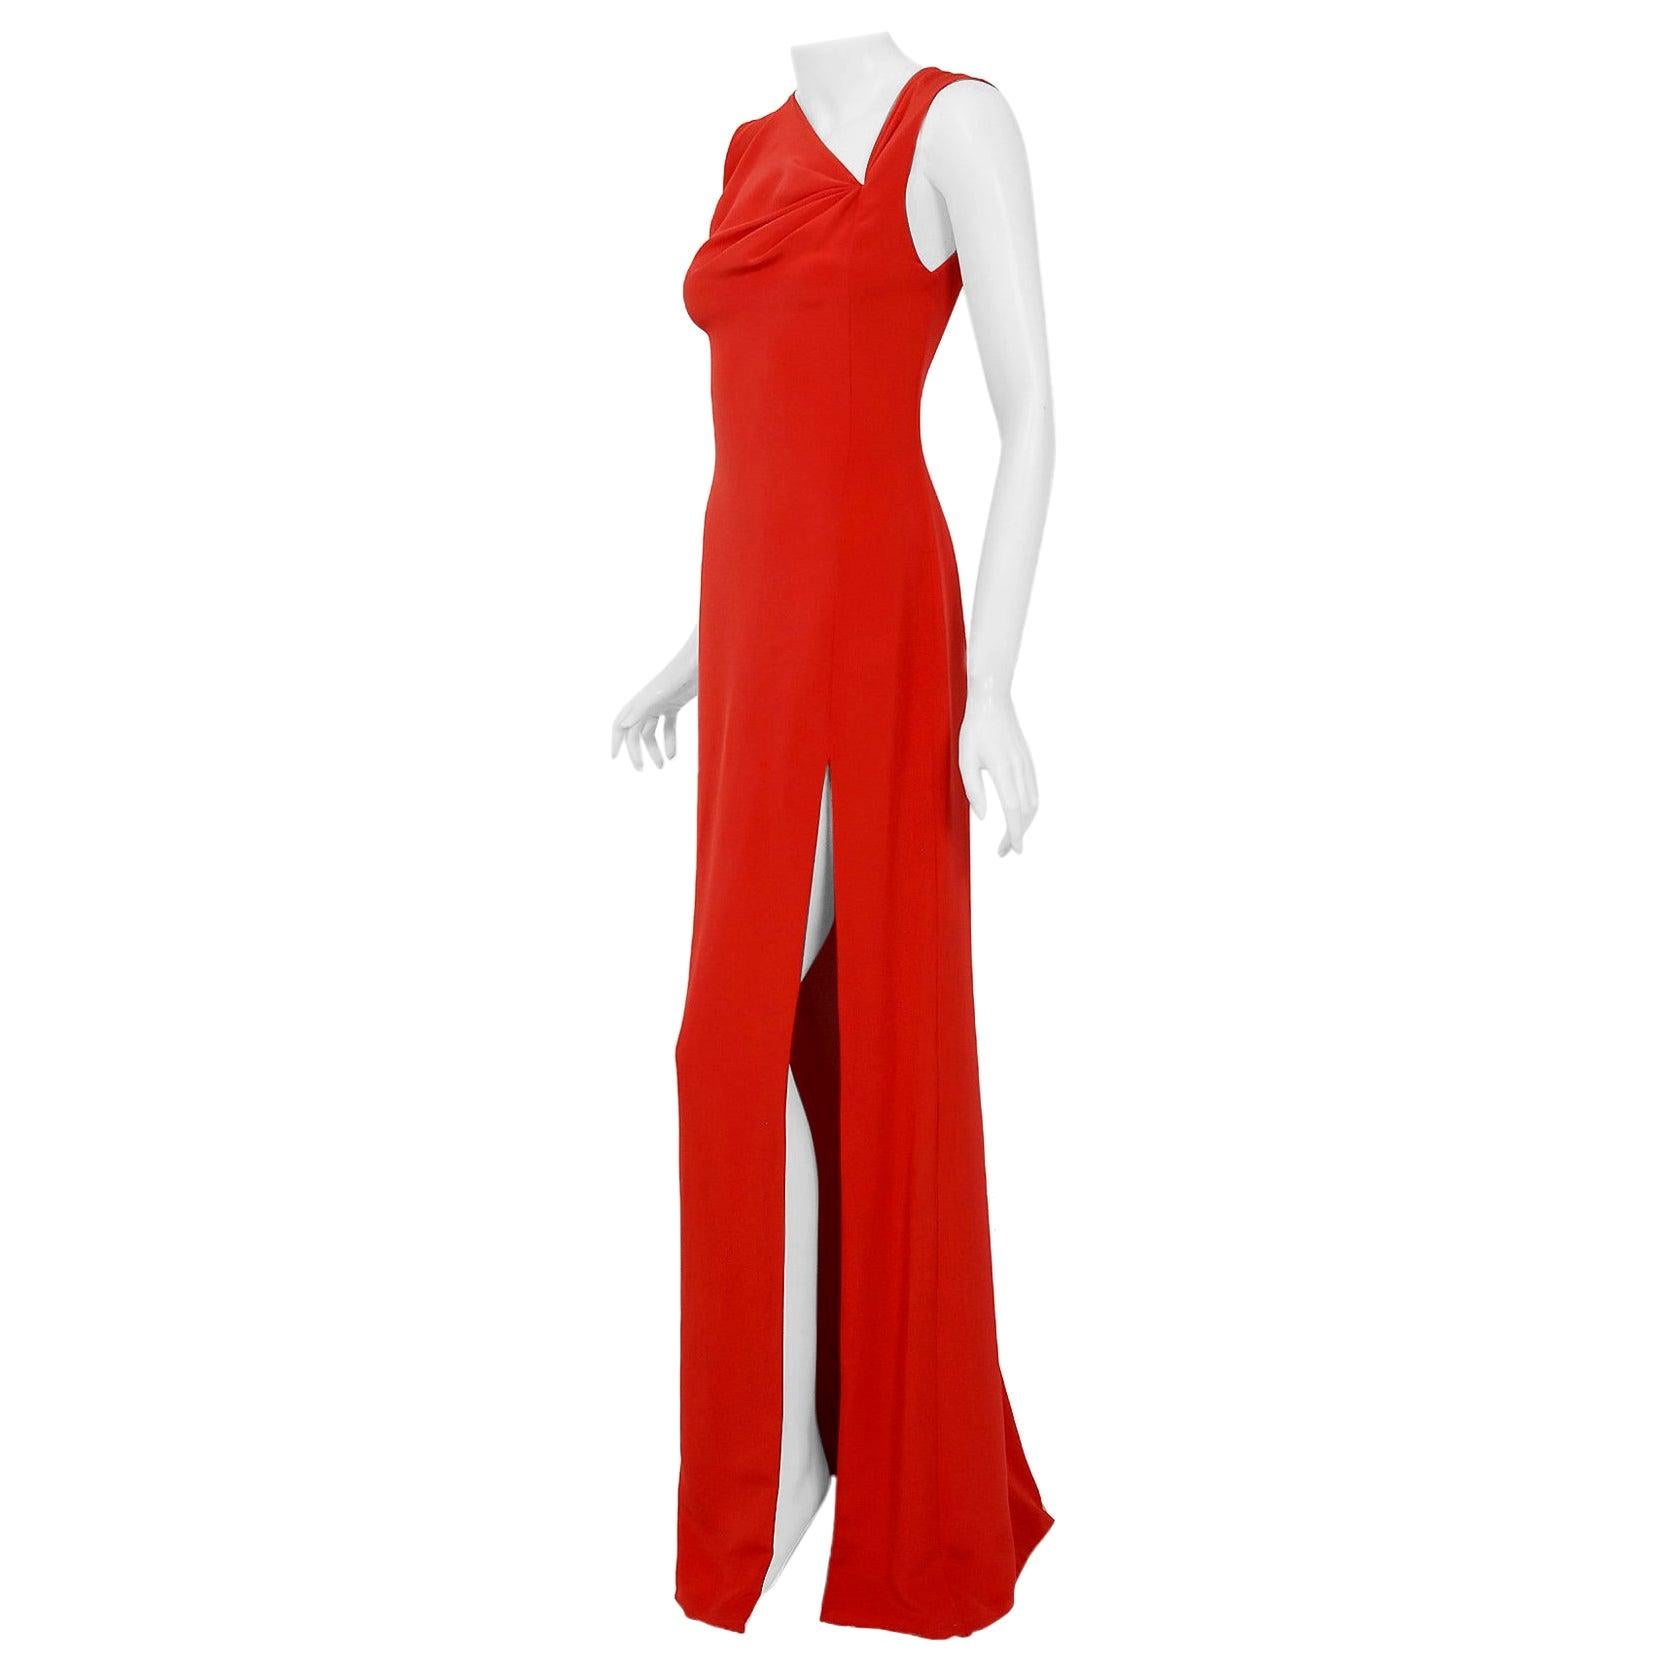 Seductive Bill Blass poppy-red silk hourglass bias-cut gown dating back to the early 1990's. Building upon the innovations of European designers such as Coco Chanel, Blass made clothes that allowed women a modern sense of ease. He made glamorous